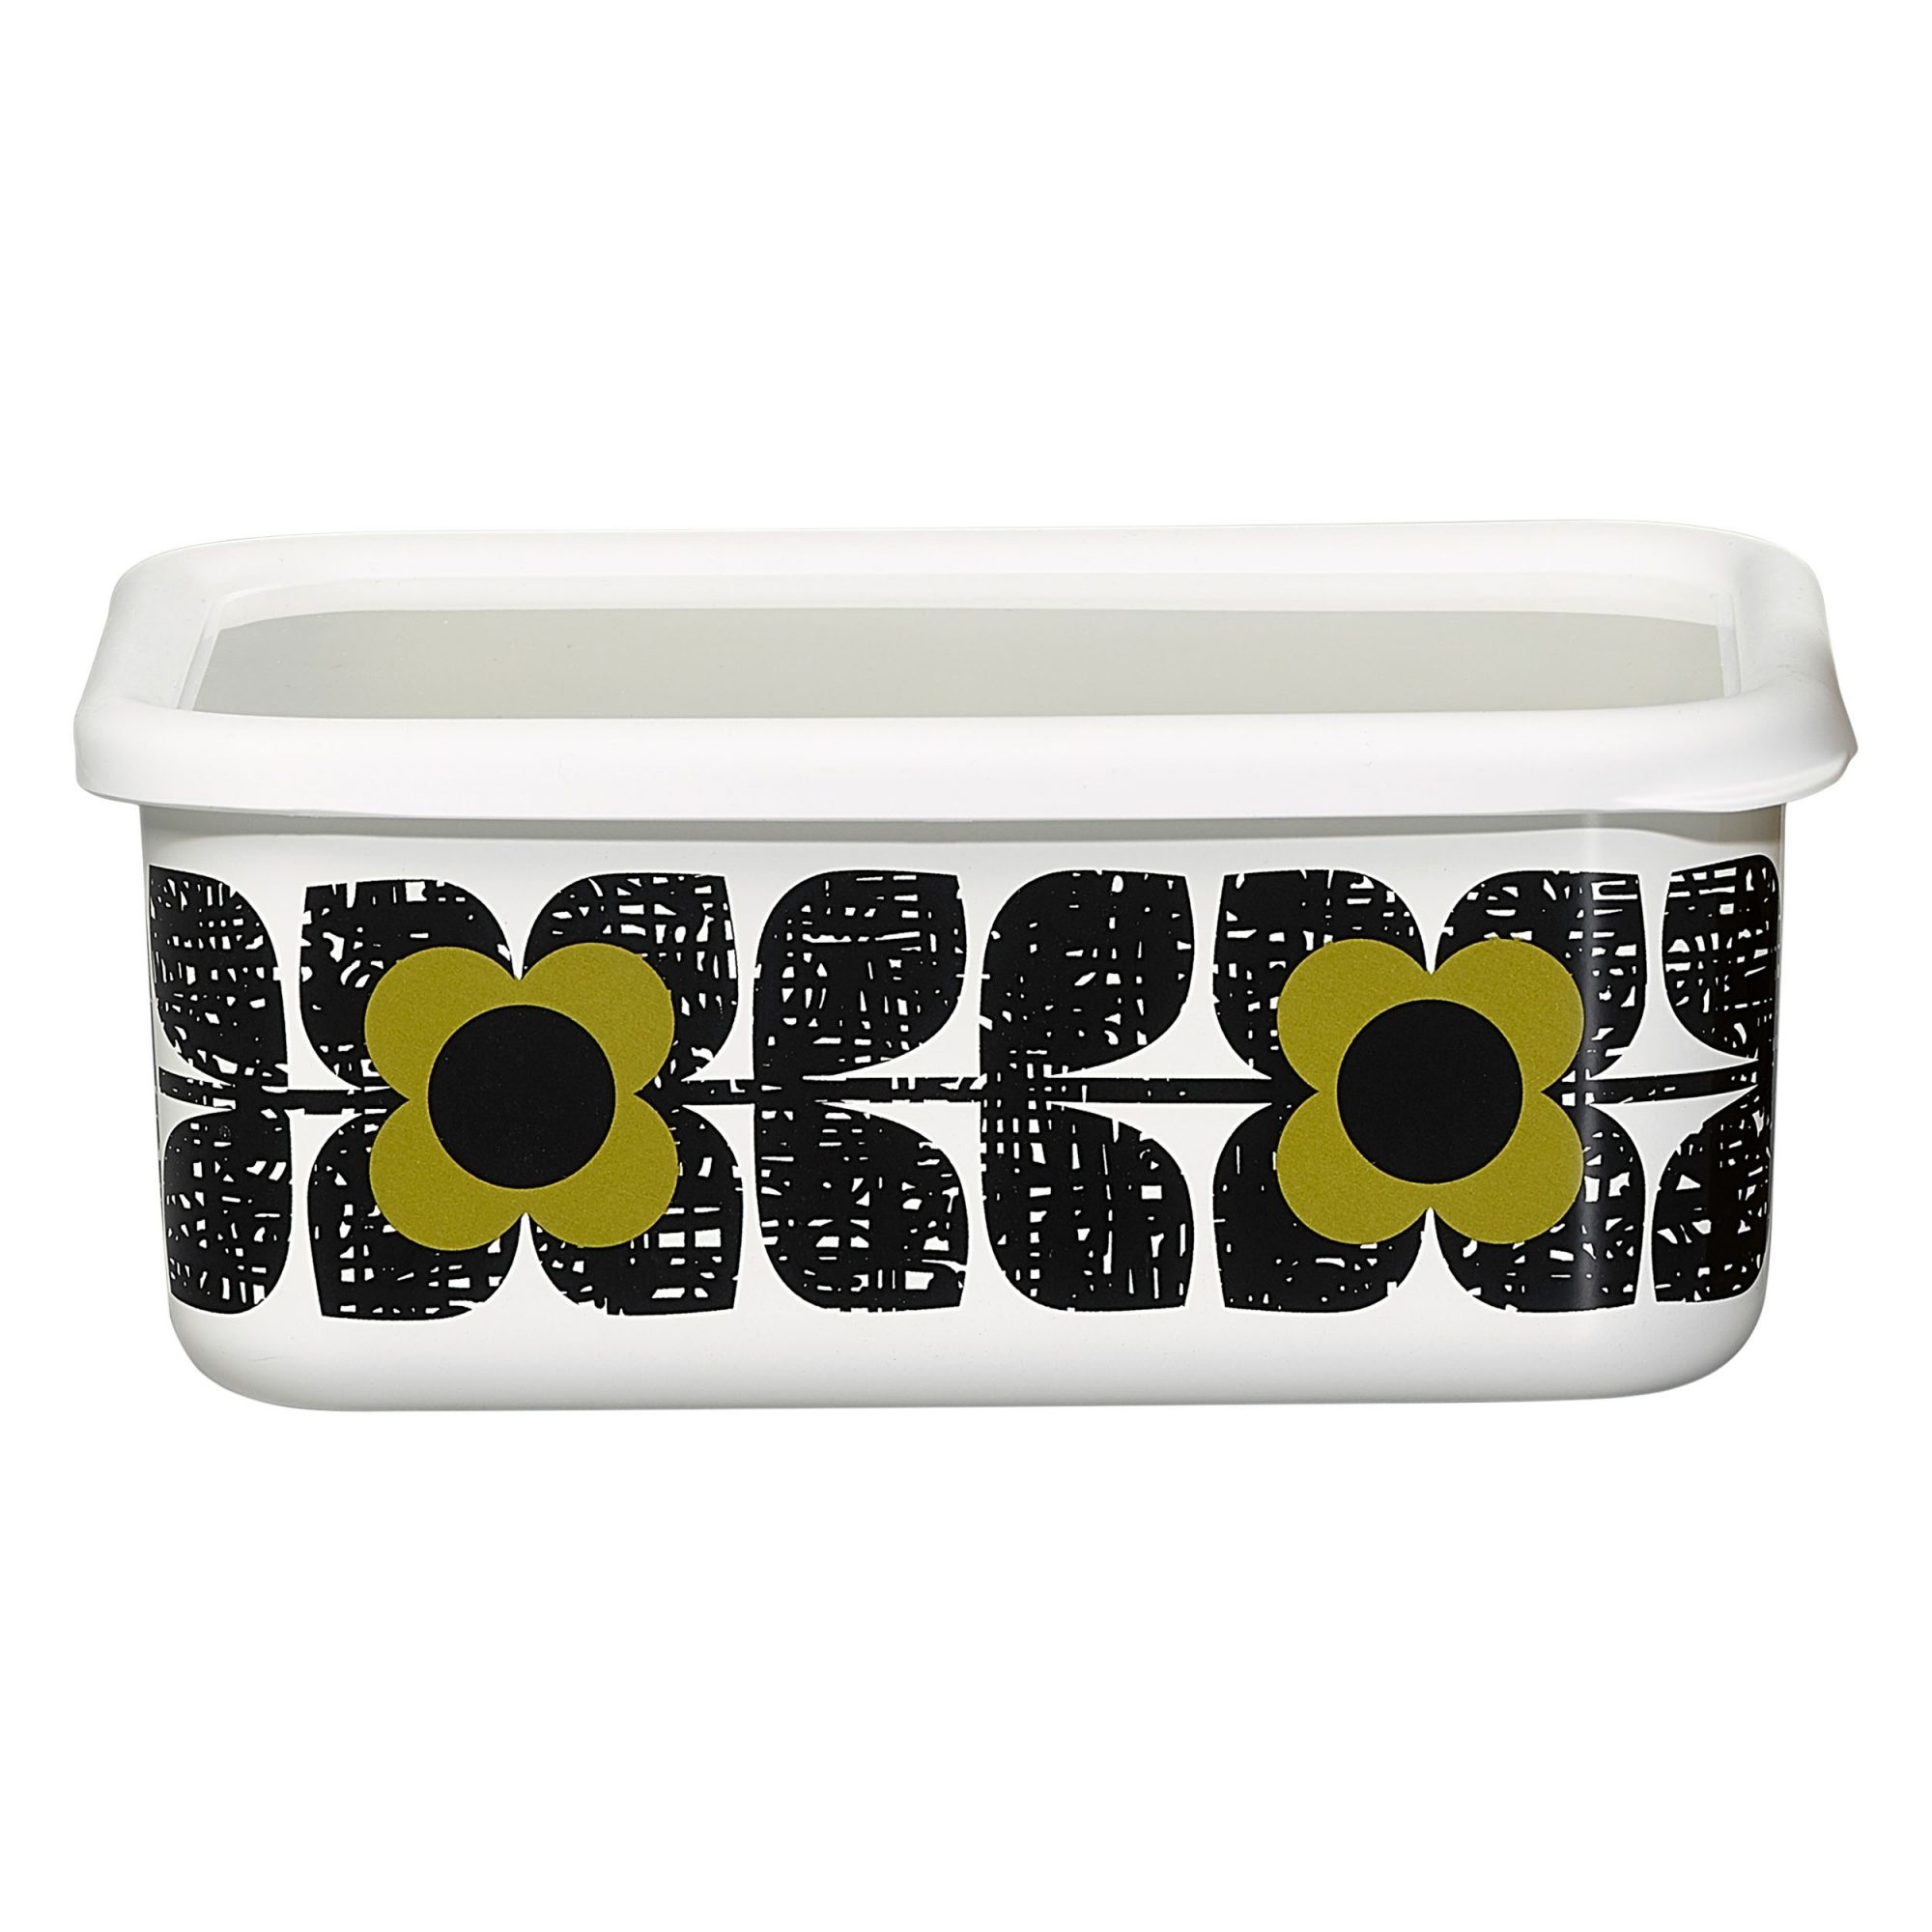 Orla Kiely Scribble Square Flower Seagrass Enamel Storage Container